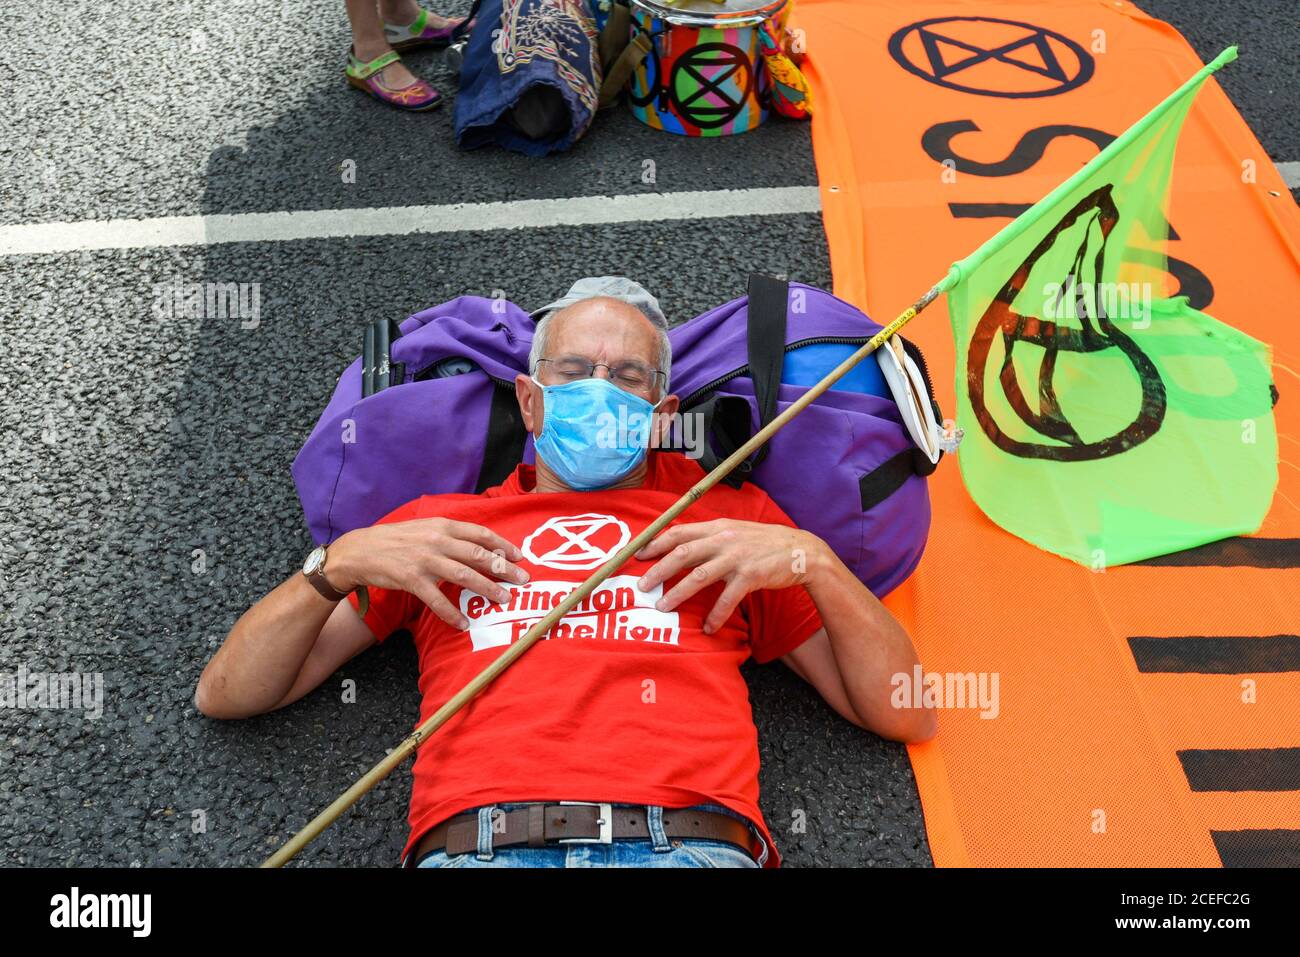 London, UK.  1 September 2020.  A (sleeping) activist from Extinction Rebellion takes part in a climate change protest in Parliament Square on the day that Members of Parliament return to Westminster after the summer recess. Credit: Stephen Chung / Alamy Live News Stock Photo